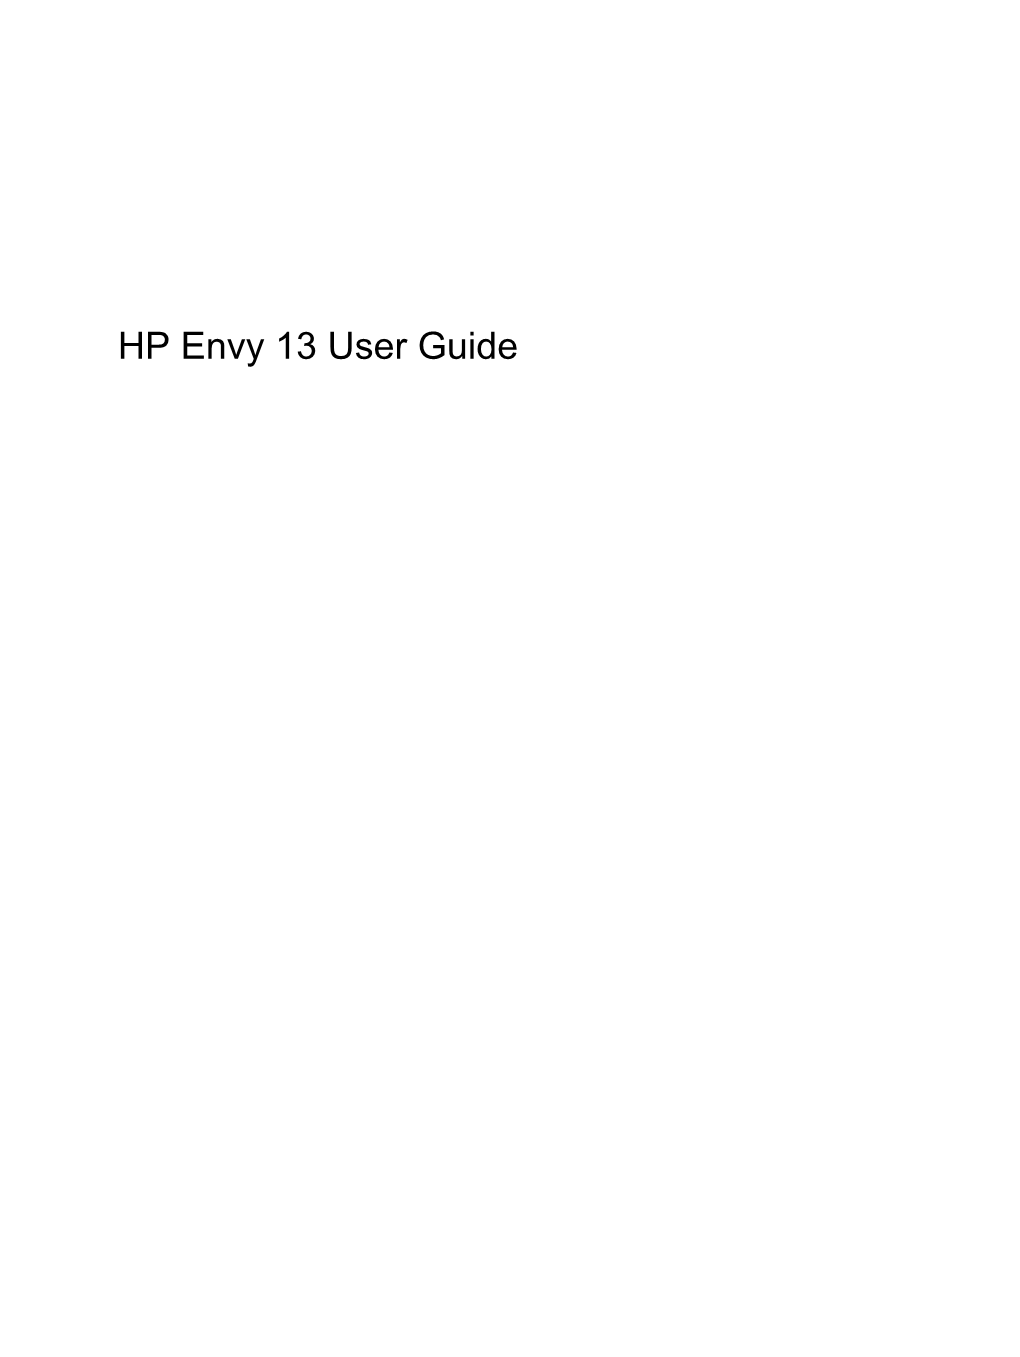 HP Envy 13 User Guide © Copyright 2009 Hewlett-Packard Product Notice Development Company, L.P